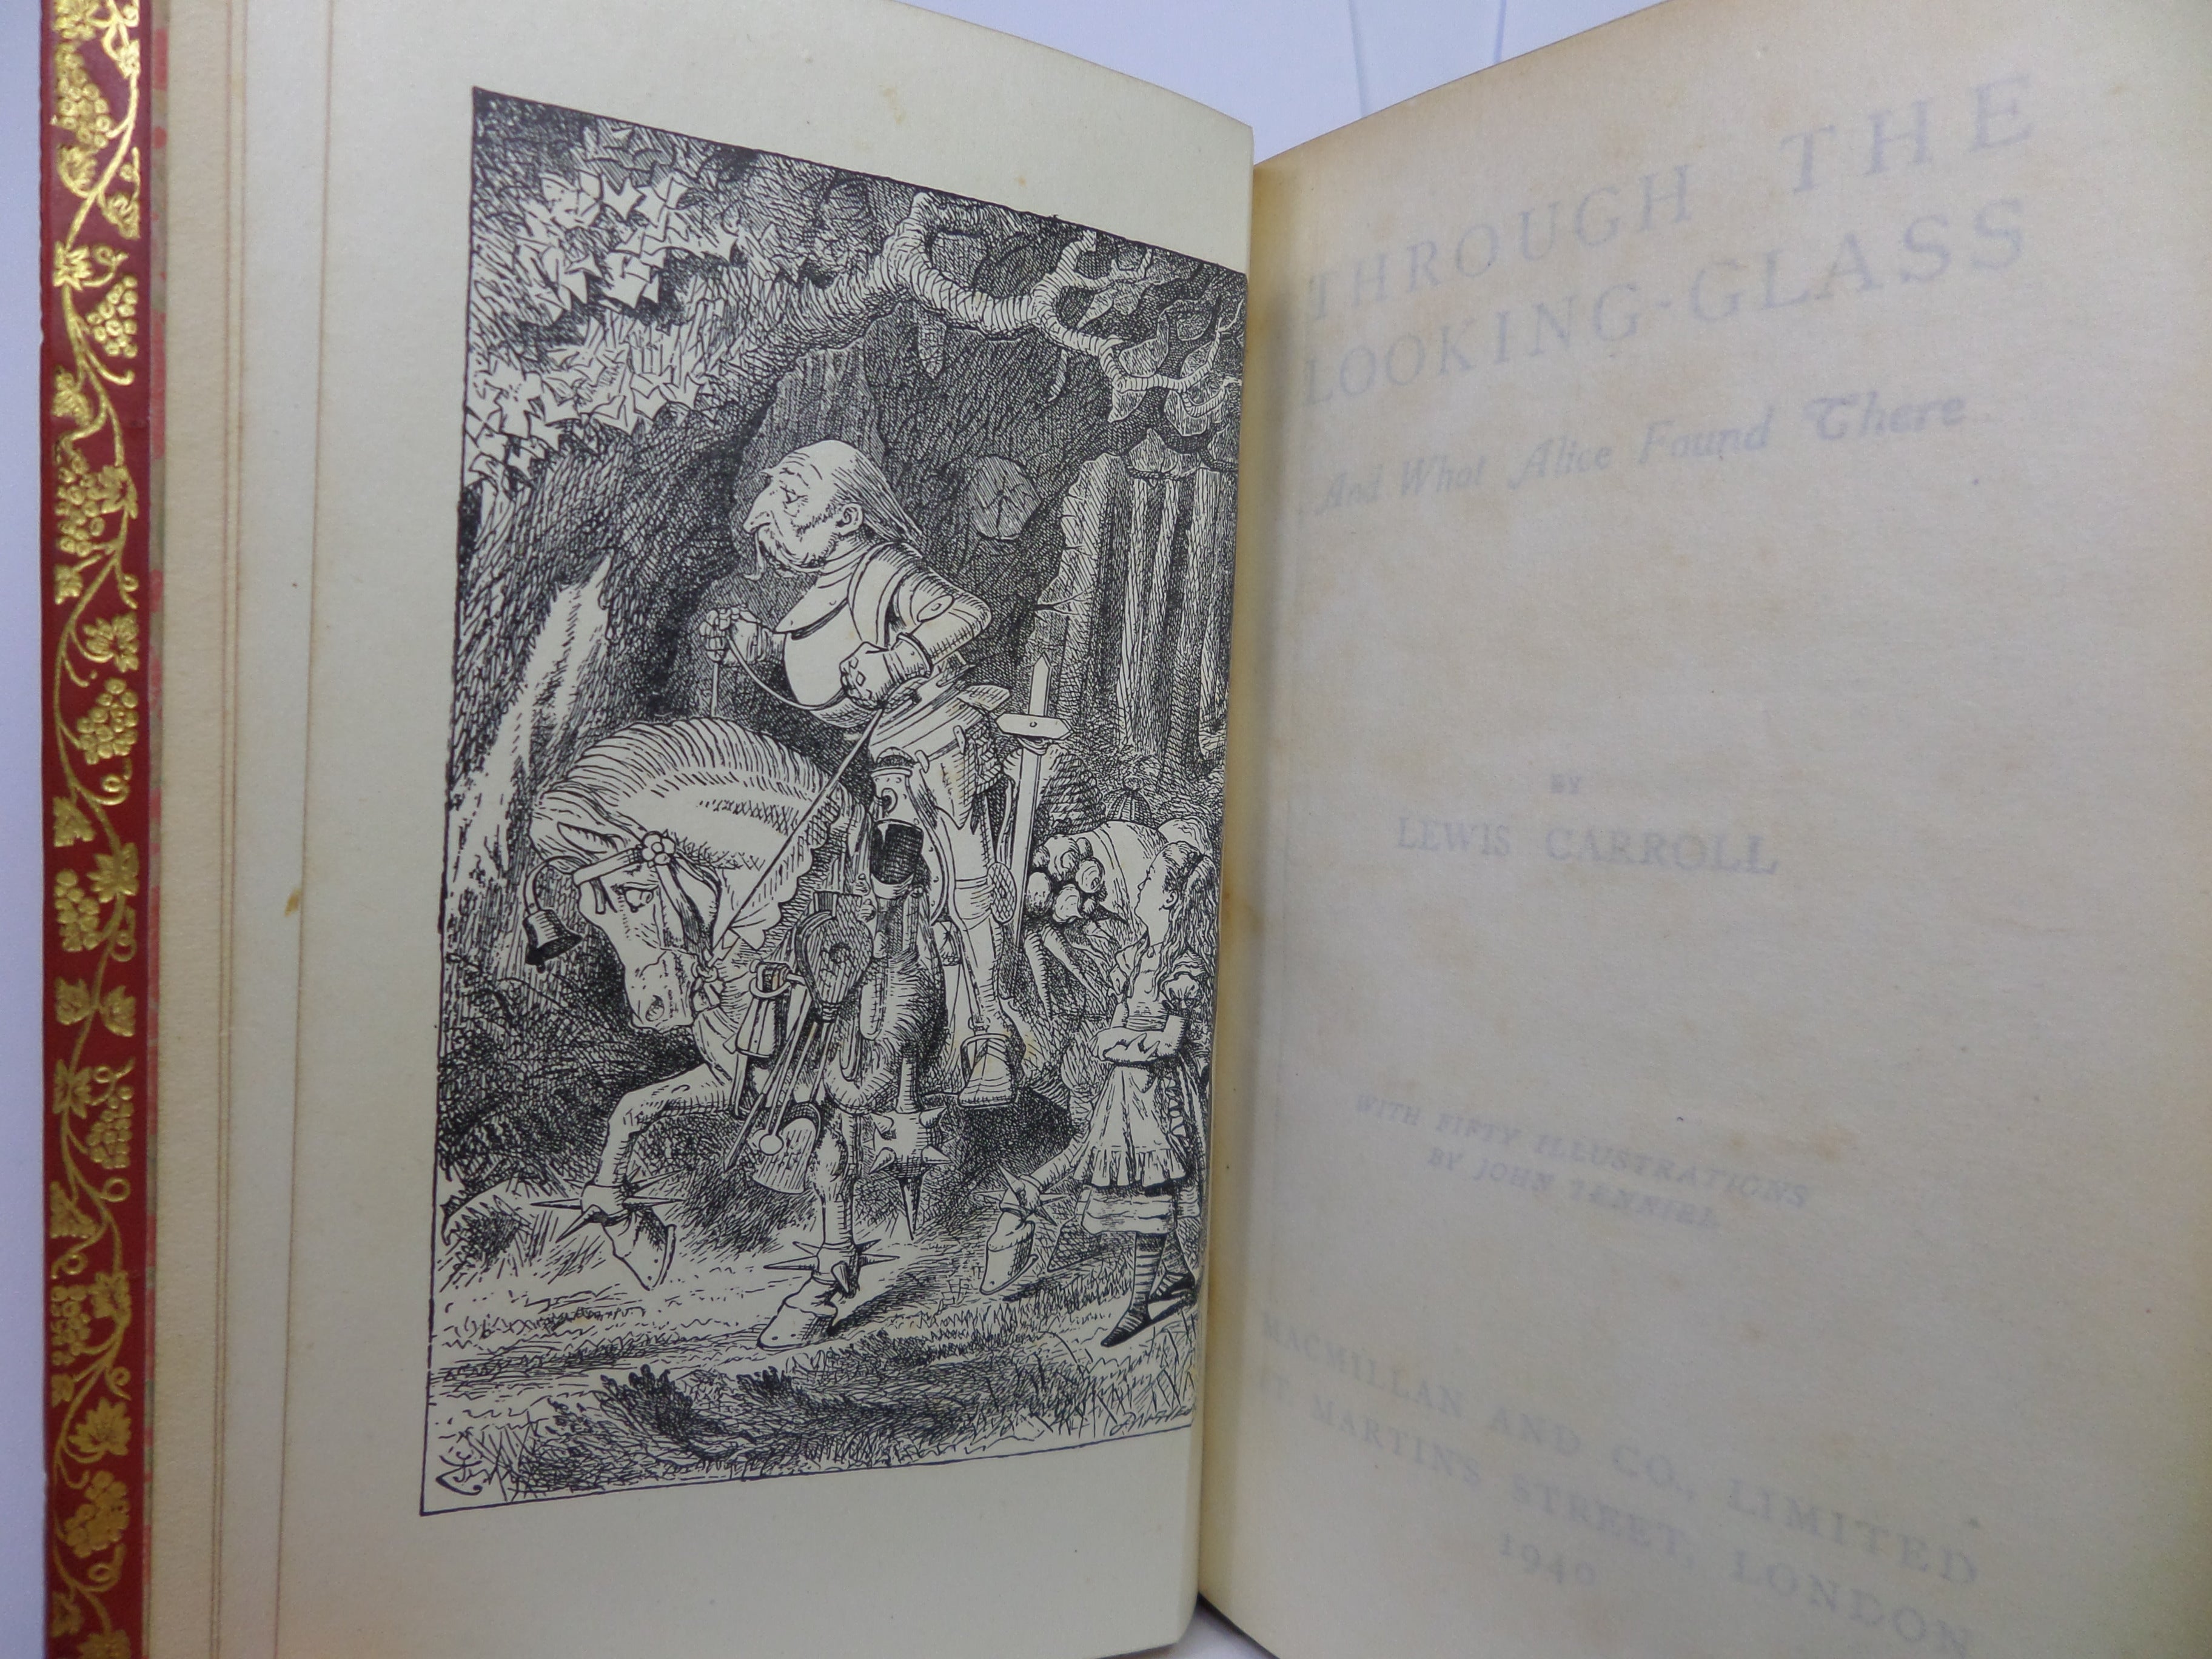 ALICE'S ADVENTURES IN WONDERLAND & THROUGH THE LOOKING-GLASS 1938-40 LEWIS CARROLL MINIATURE EDITIONS BOUND BY BAYNTUN